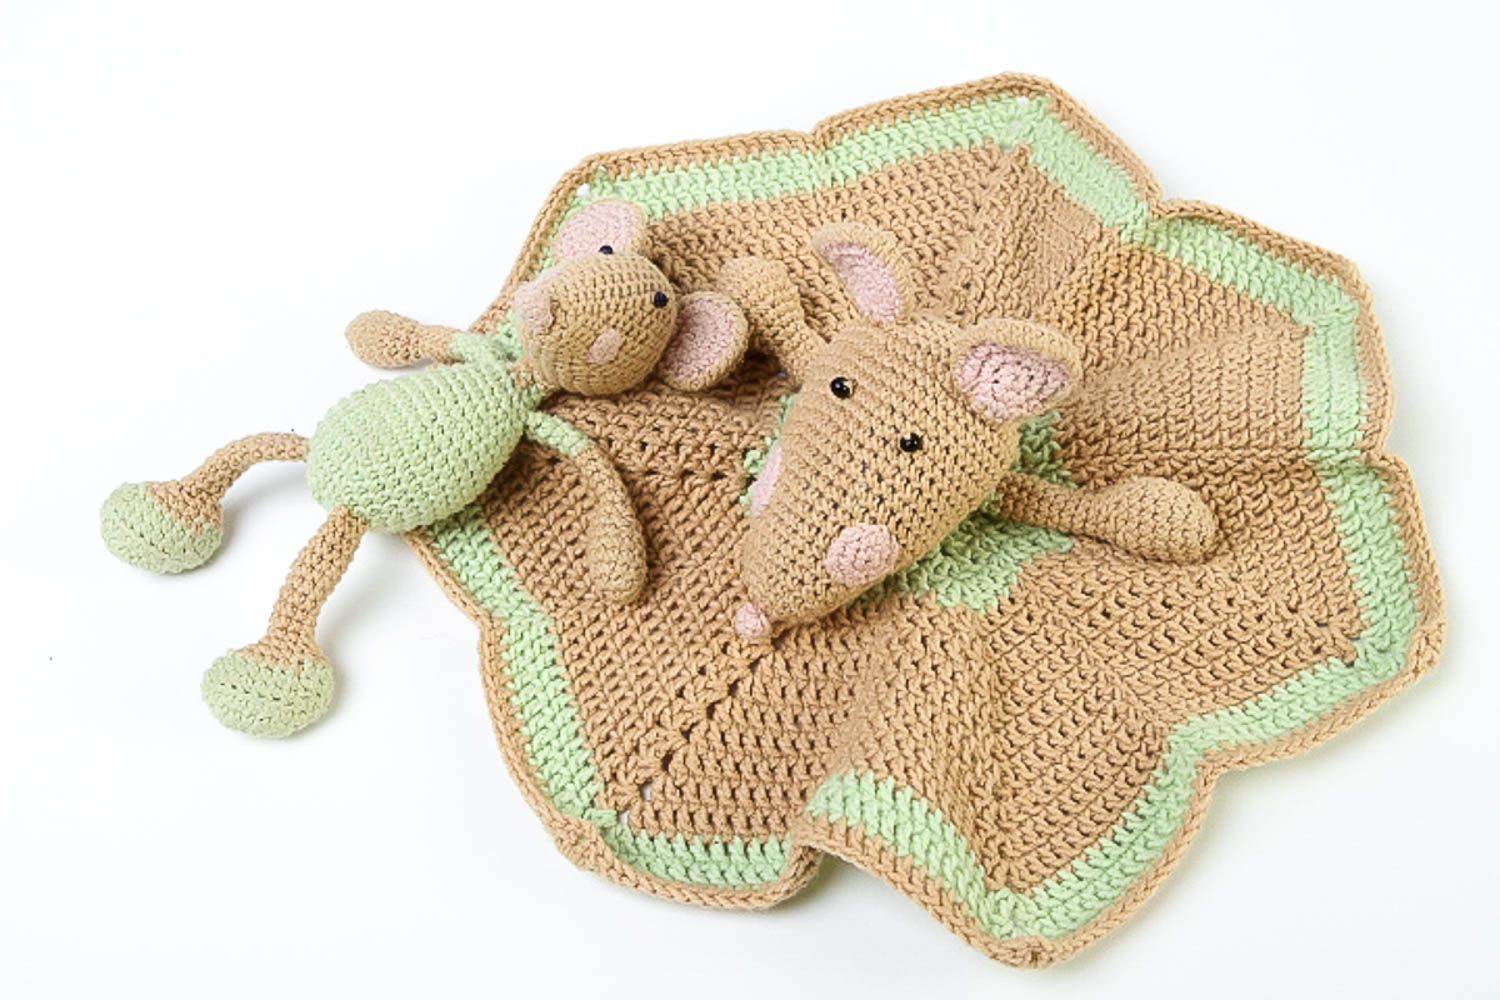 Handmade crocheted soft toy for babies nursery decor ideas soft toy for children photo 2